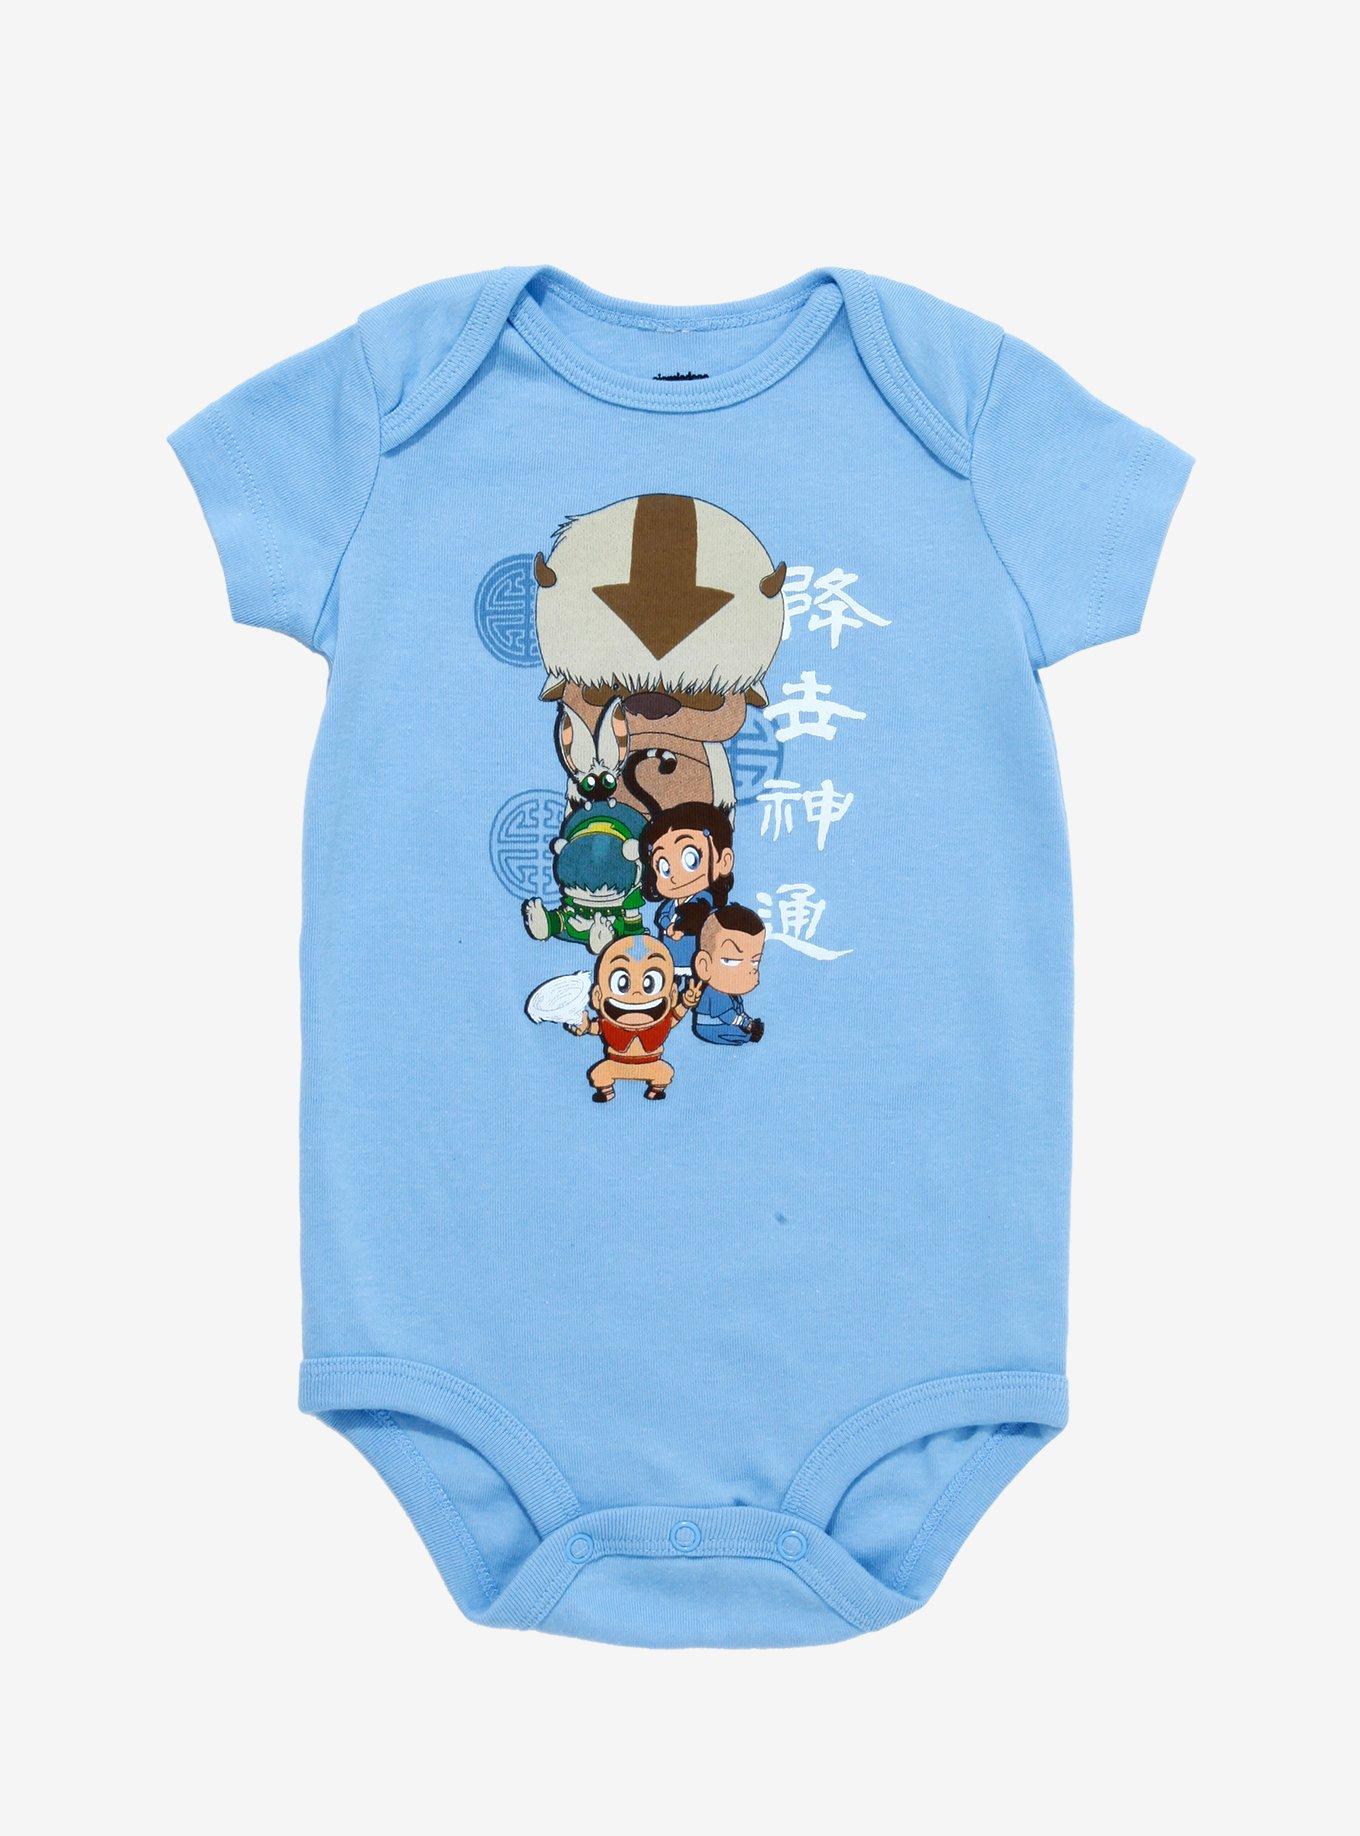 One Piece Chibi Monkey D. Luffy Sleep Pants - BoxLunch Exclusive